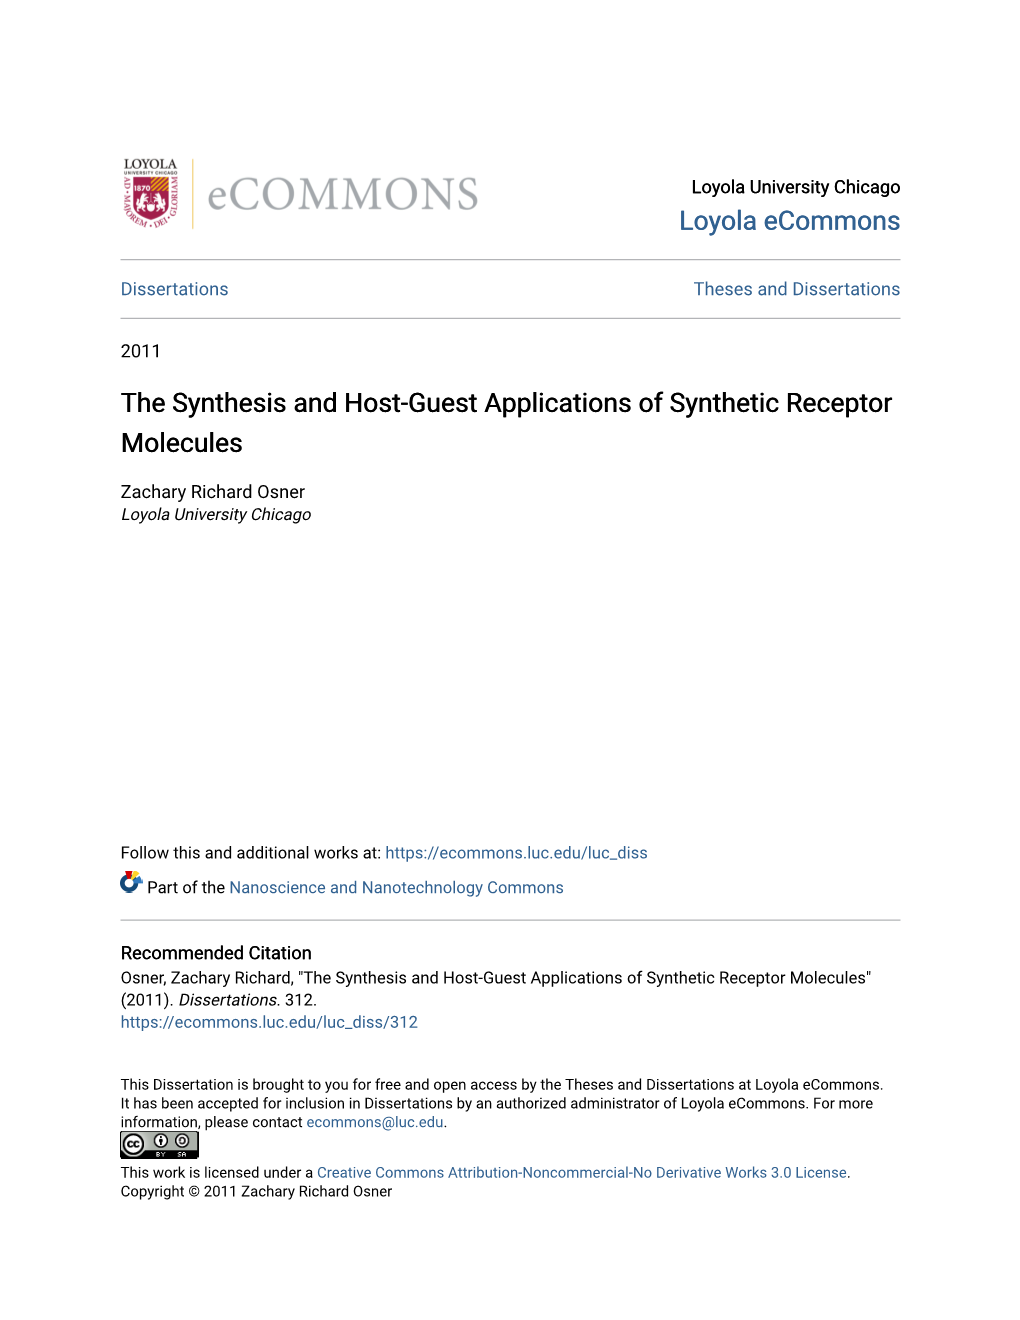 The Synthesis and Host-Guest Applications of Synthetic Receptor Molecules